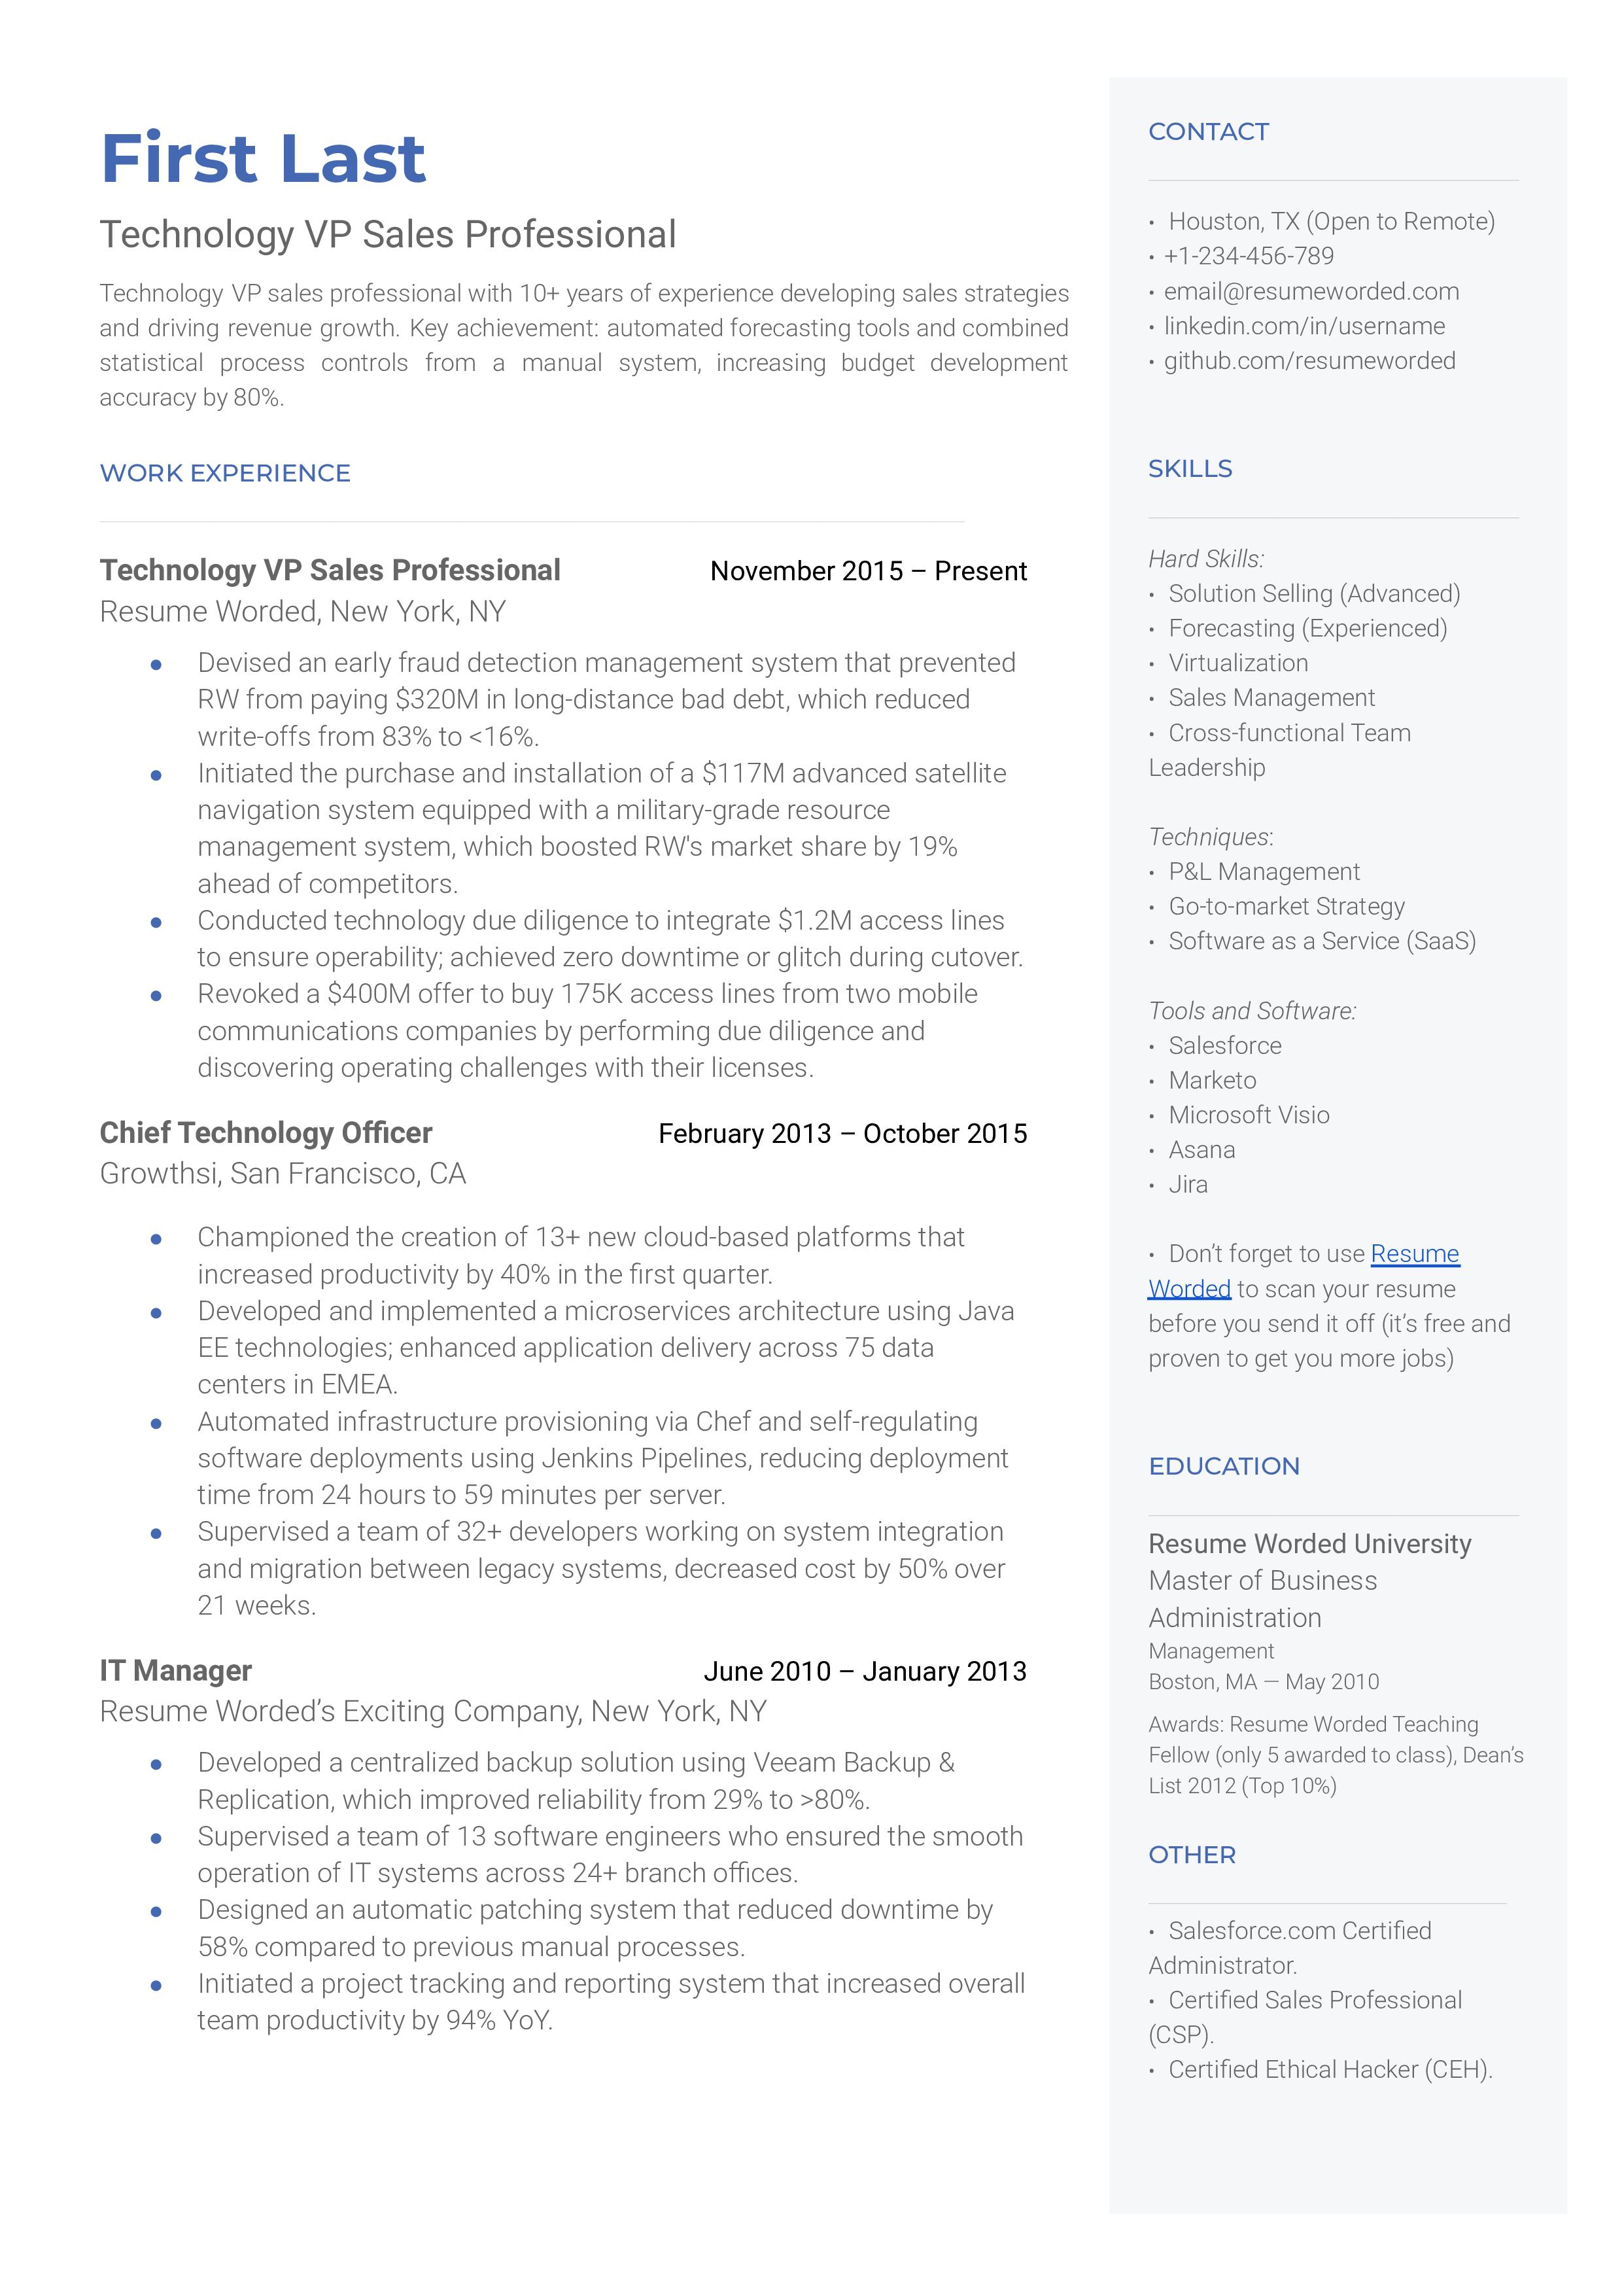 A technology VP of sales resume sample that highlights the applicant’s tech-related achievements and experience.